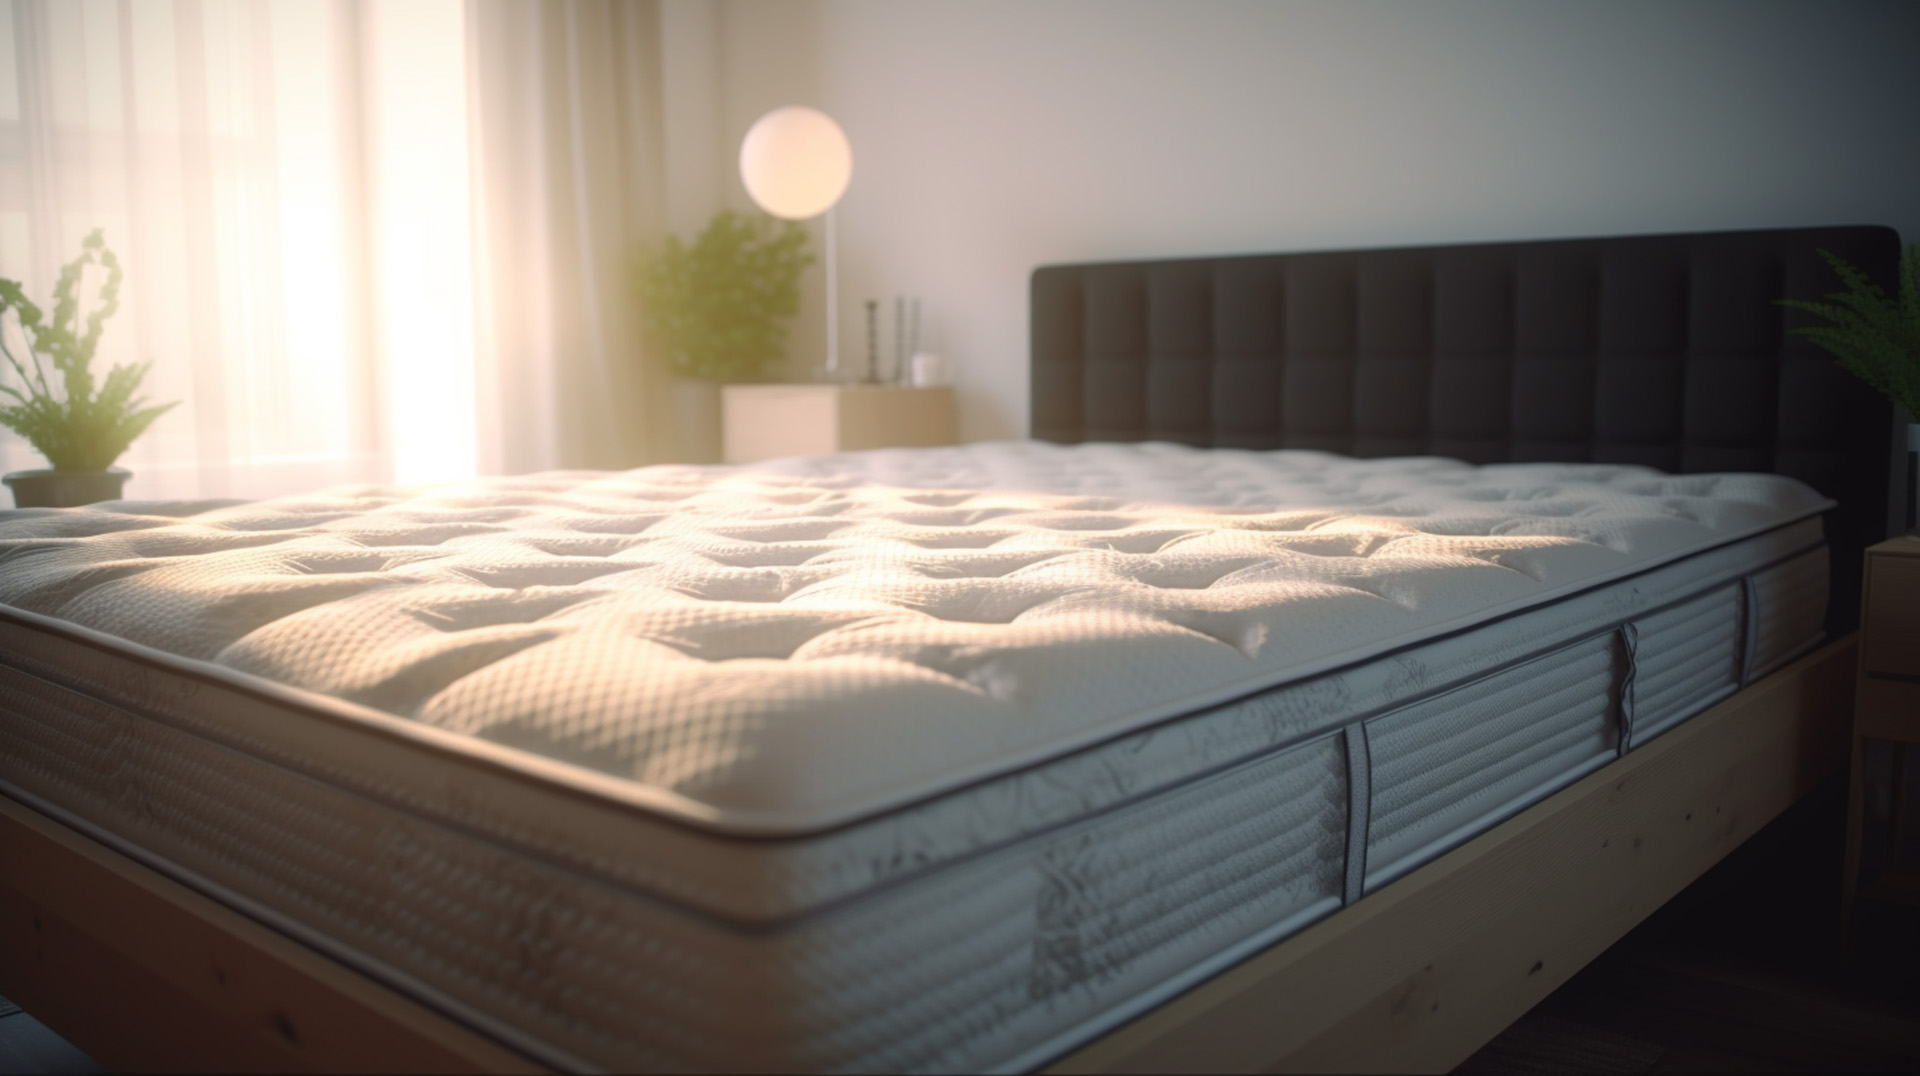 Shop Organic Mattresses and Beds in Collierville, TN